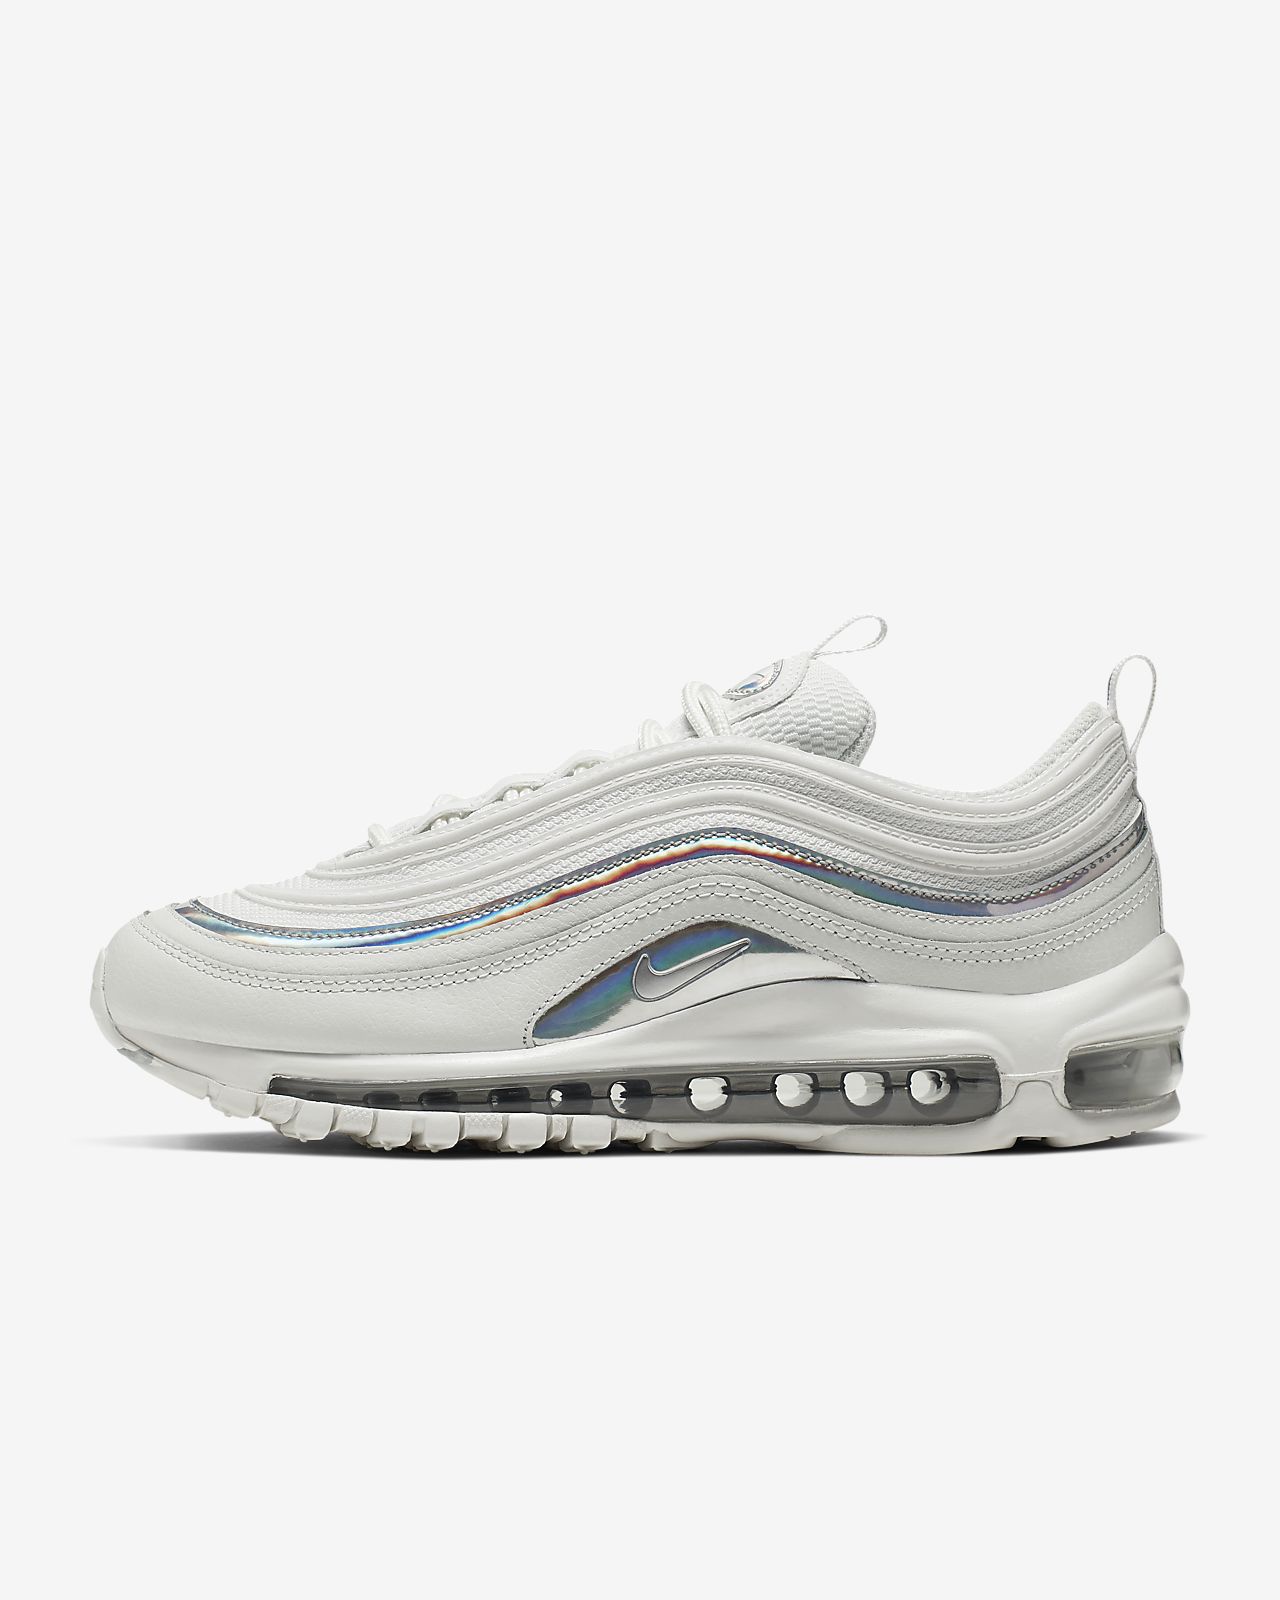 Nike Air Max 97 Release Guide for Fall 10 Colorways to